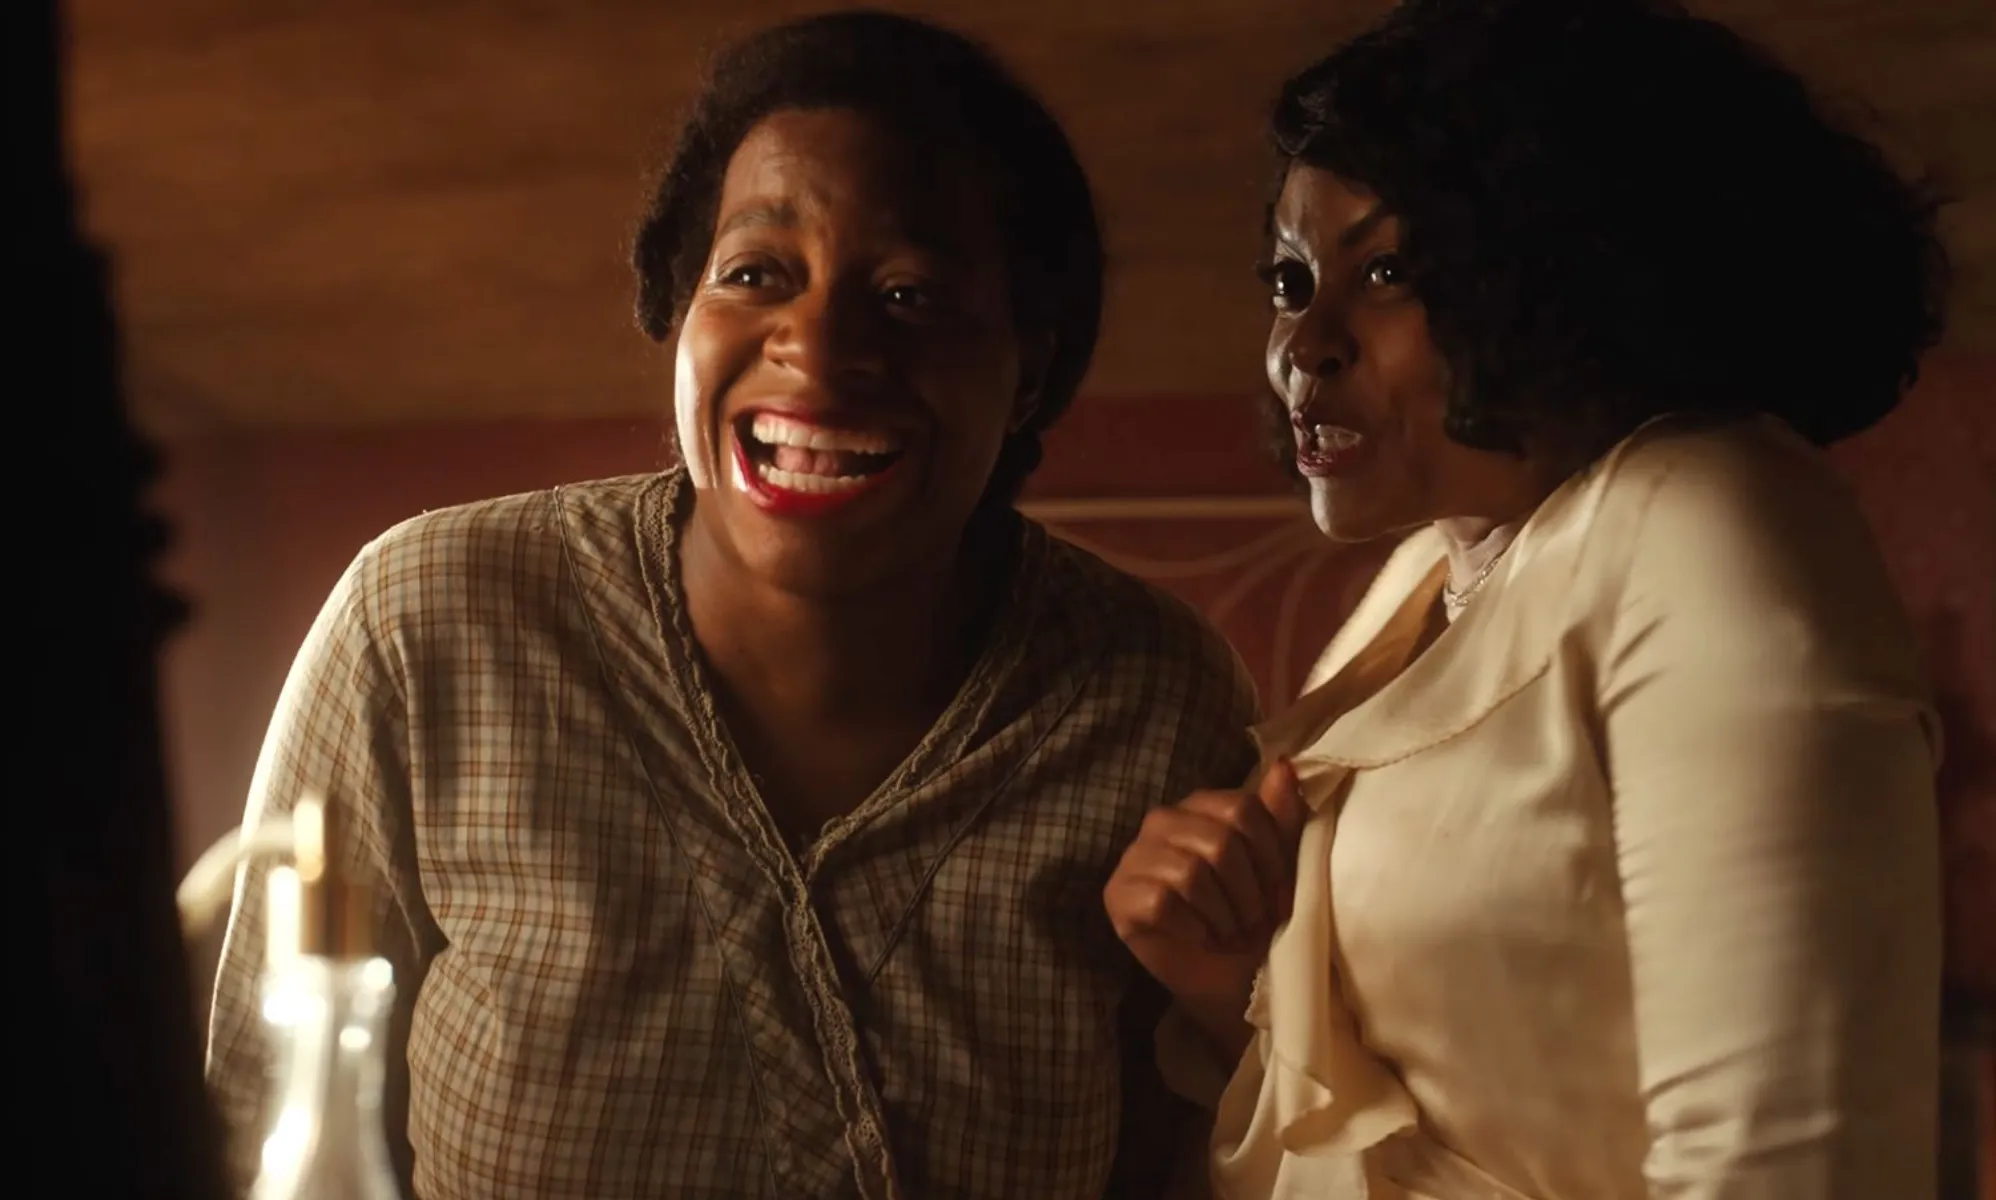 The Colour Purple trailer is here and queer fans are concerned